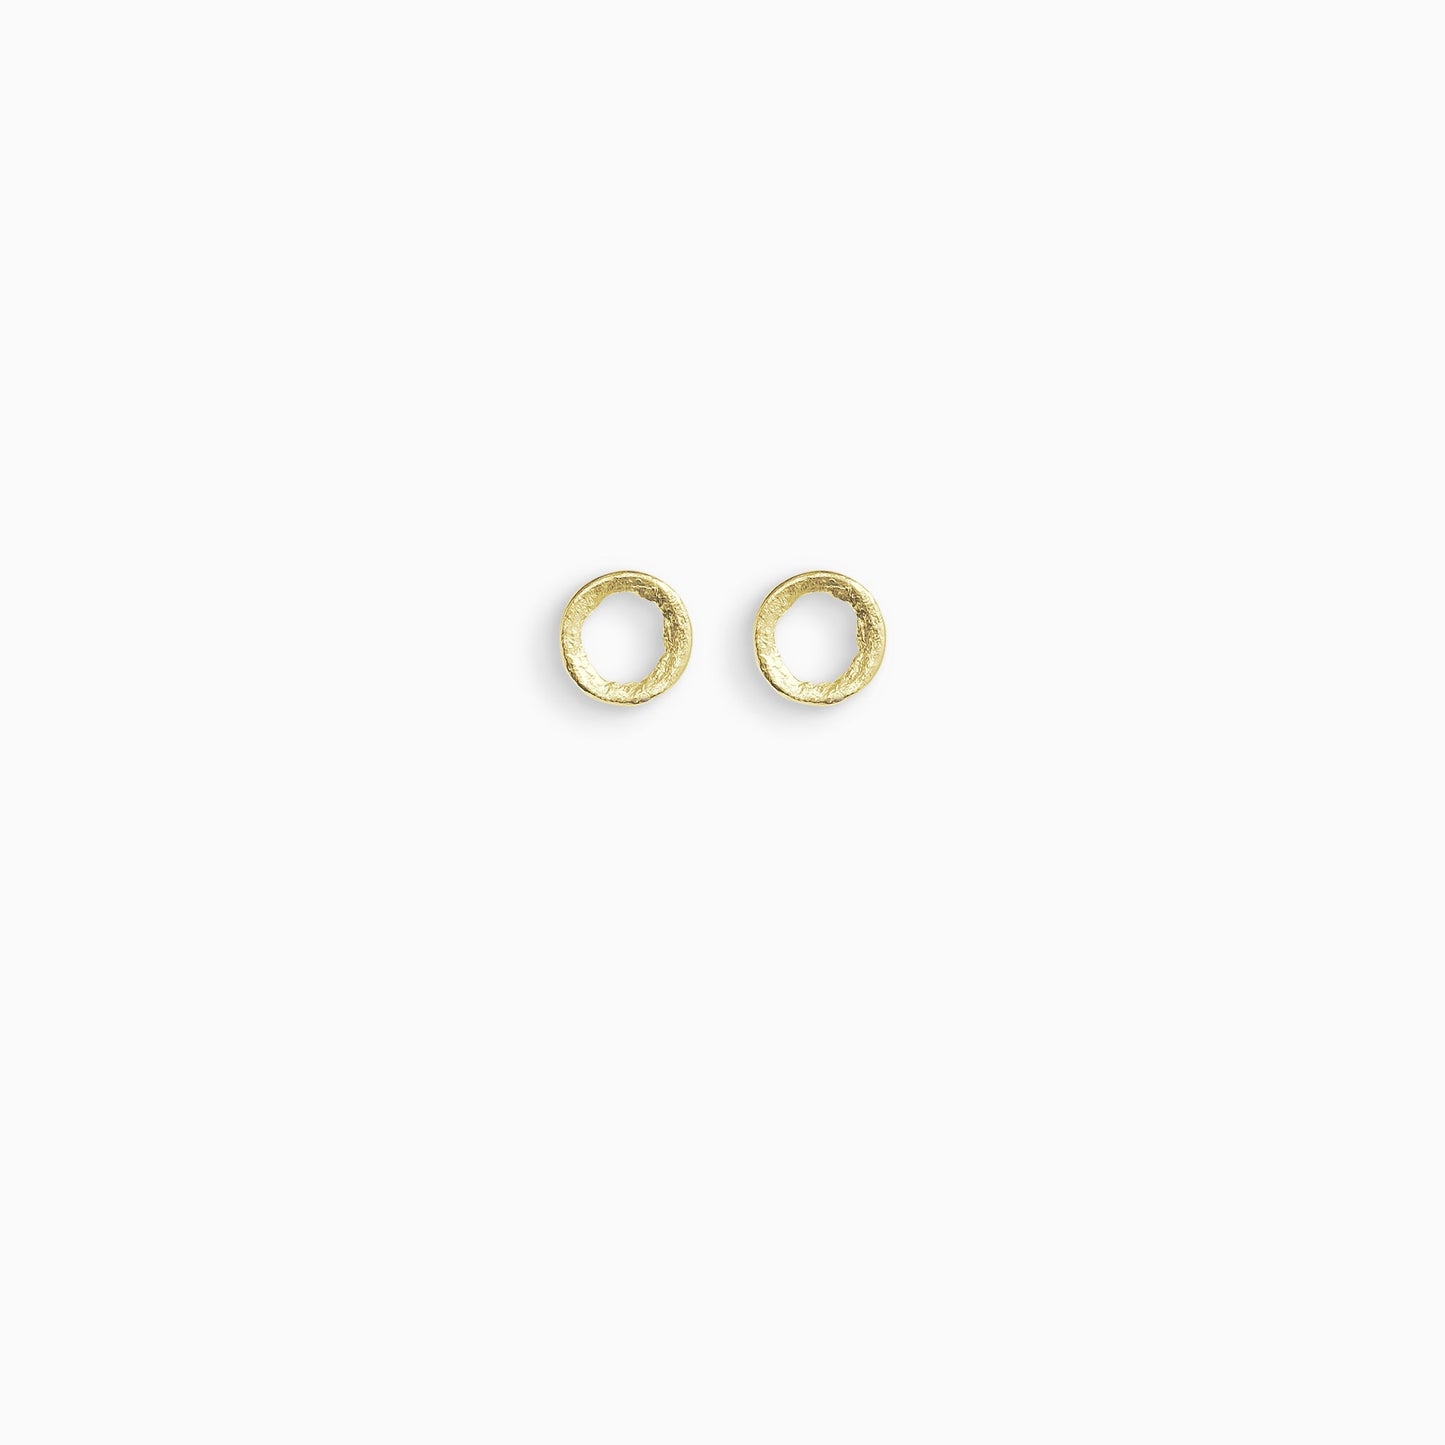 A pair of 18ct Fairtrade yellow gold stud earrings, round in form with an open centre. Strong organic texture. Smooth outside edge, fragmented inside edges. 11mm outside diameter.